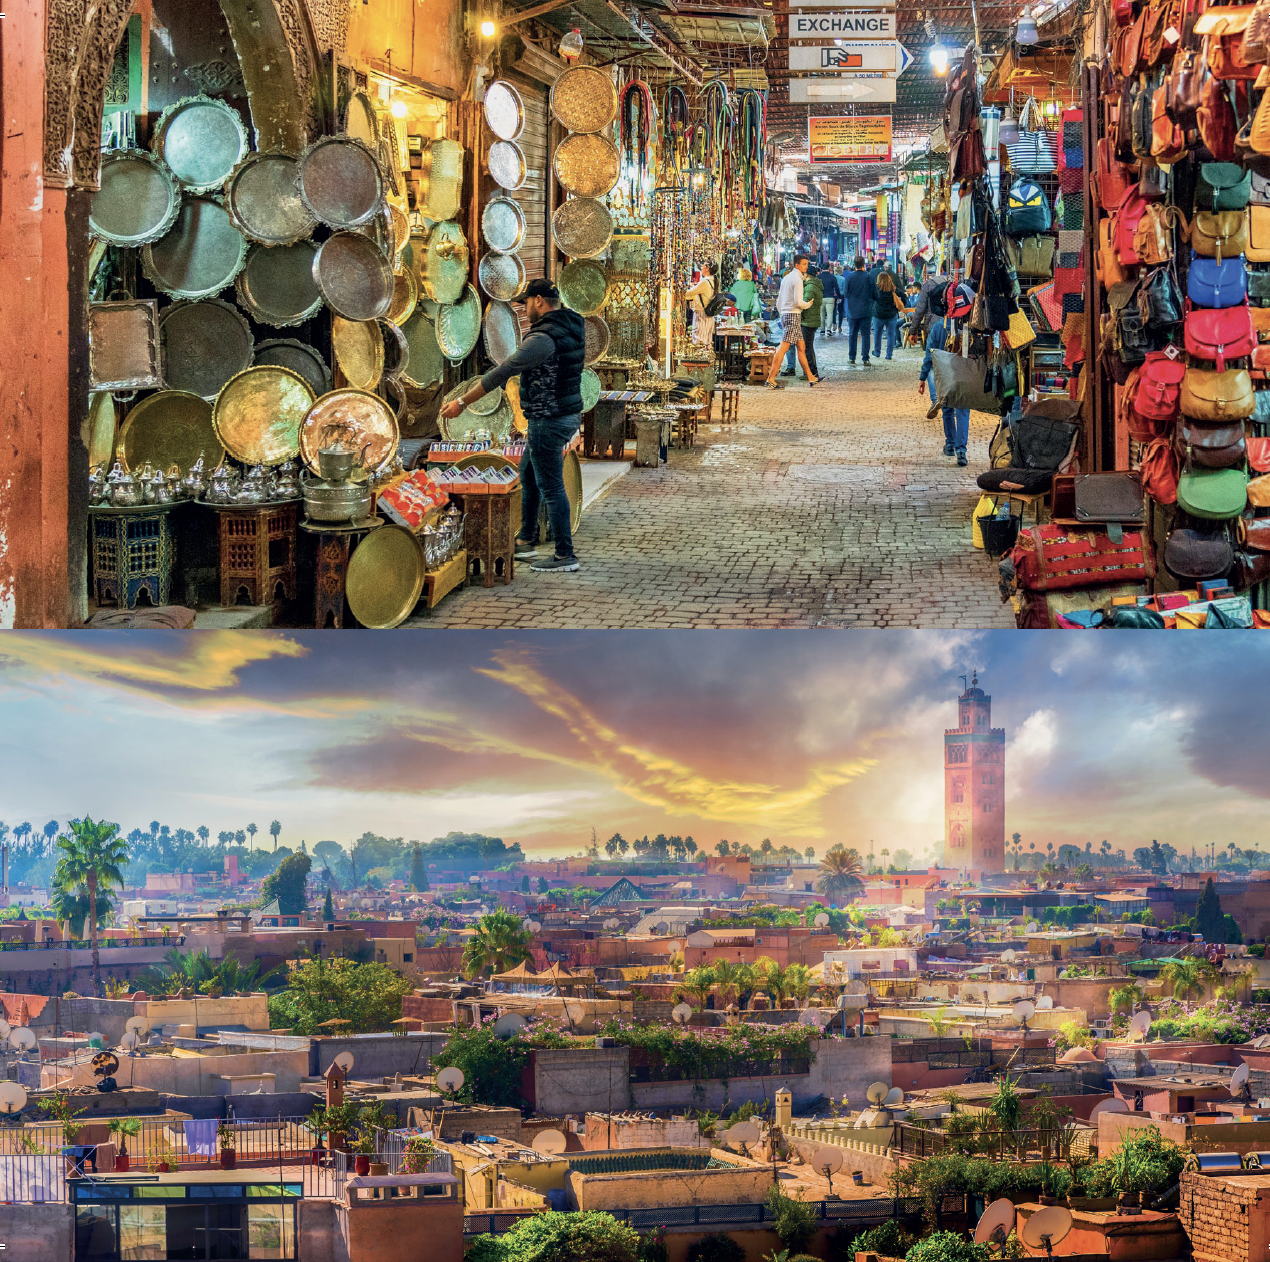 Top image showing a souk with pans and leather bags. The lower image is a cityscape view of Marrakech